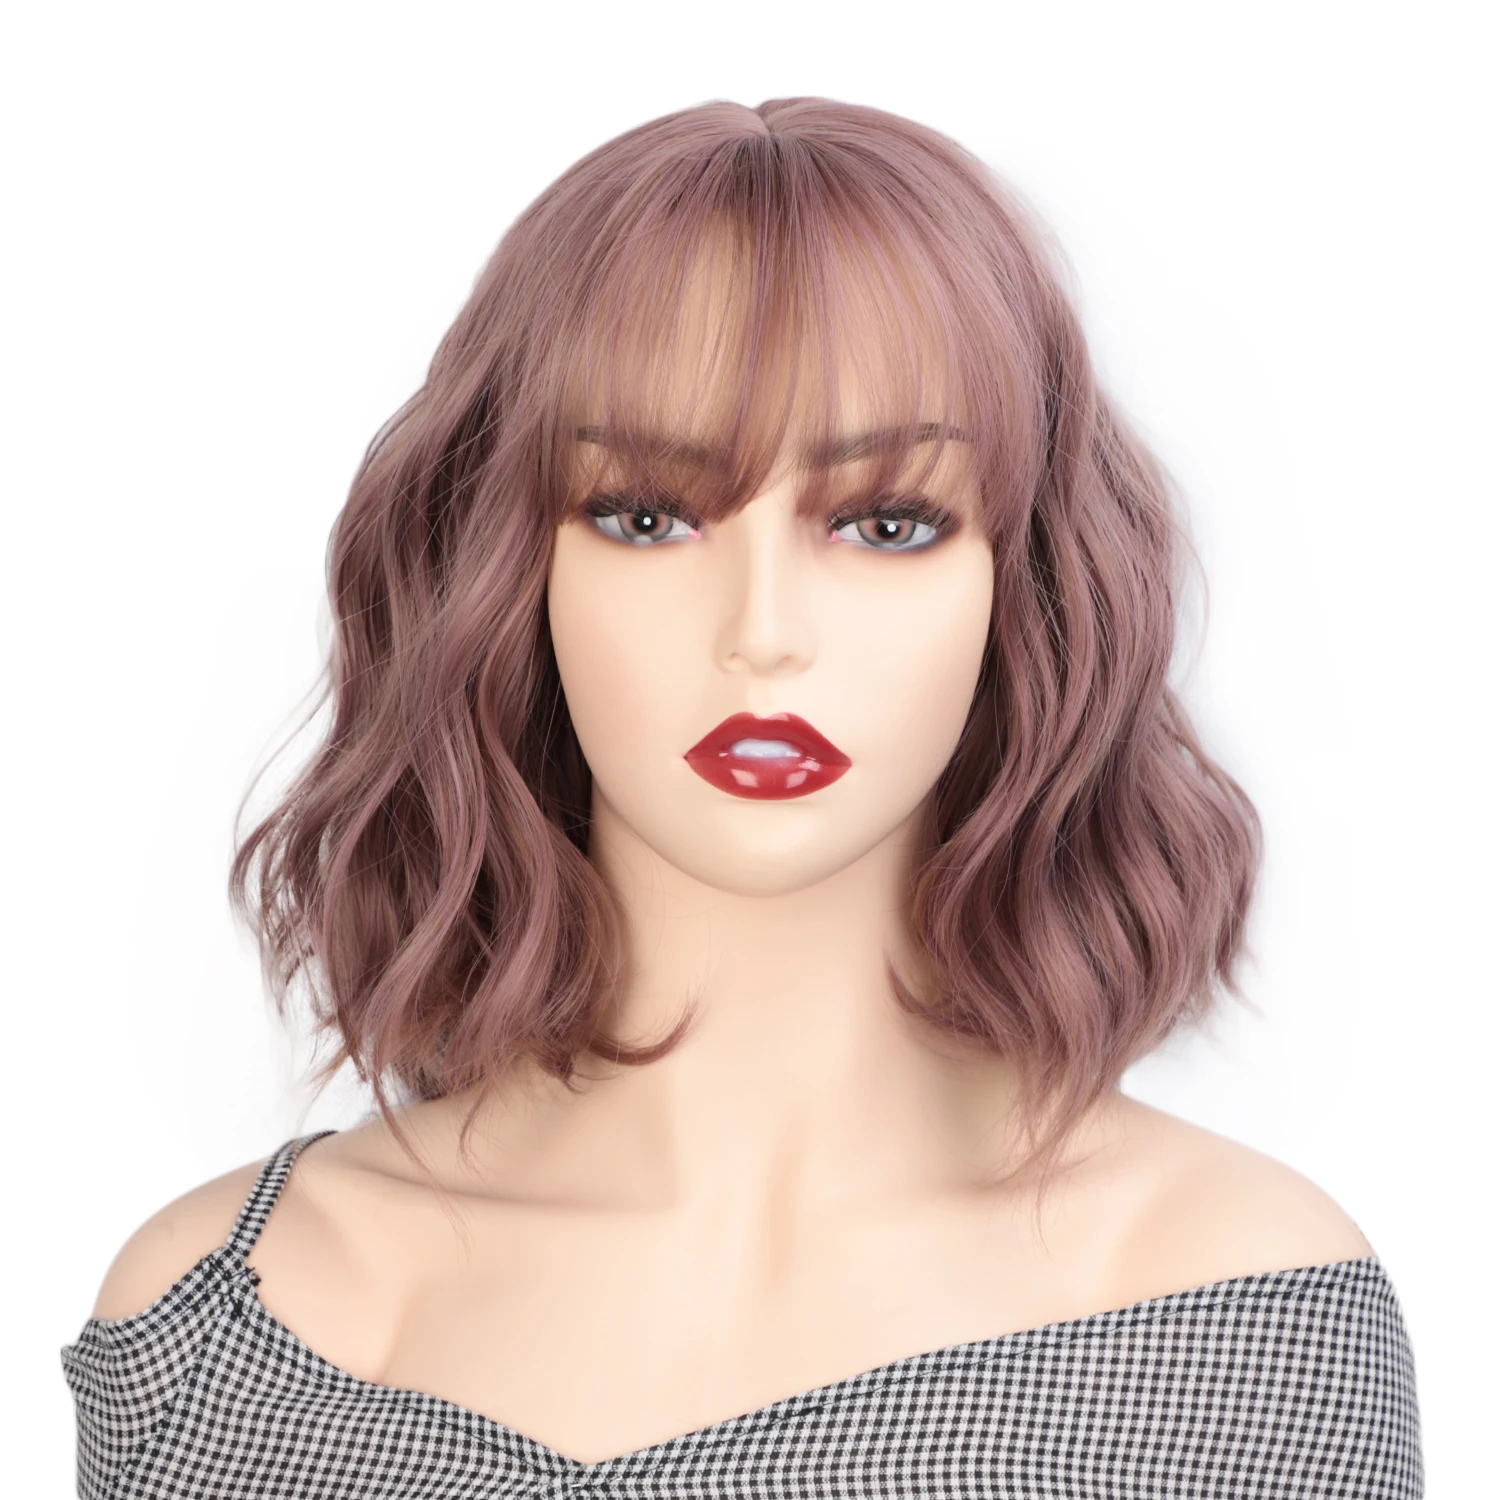 

Aisi Hair Vendor Cheap Wholesale Cosplay Water Wave 14 Inch Short Bob Pink Wig With Bangs For Black Women Synthetic Hair Wigs